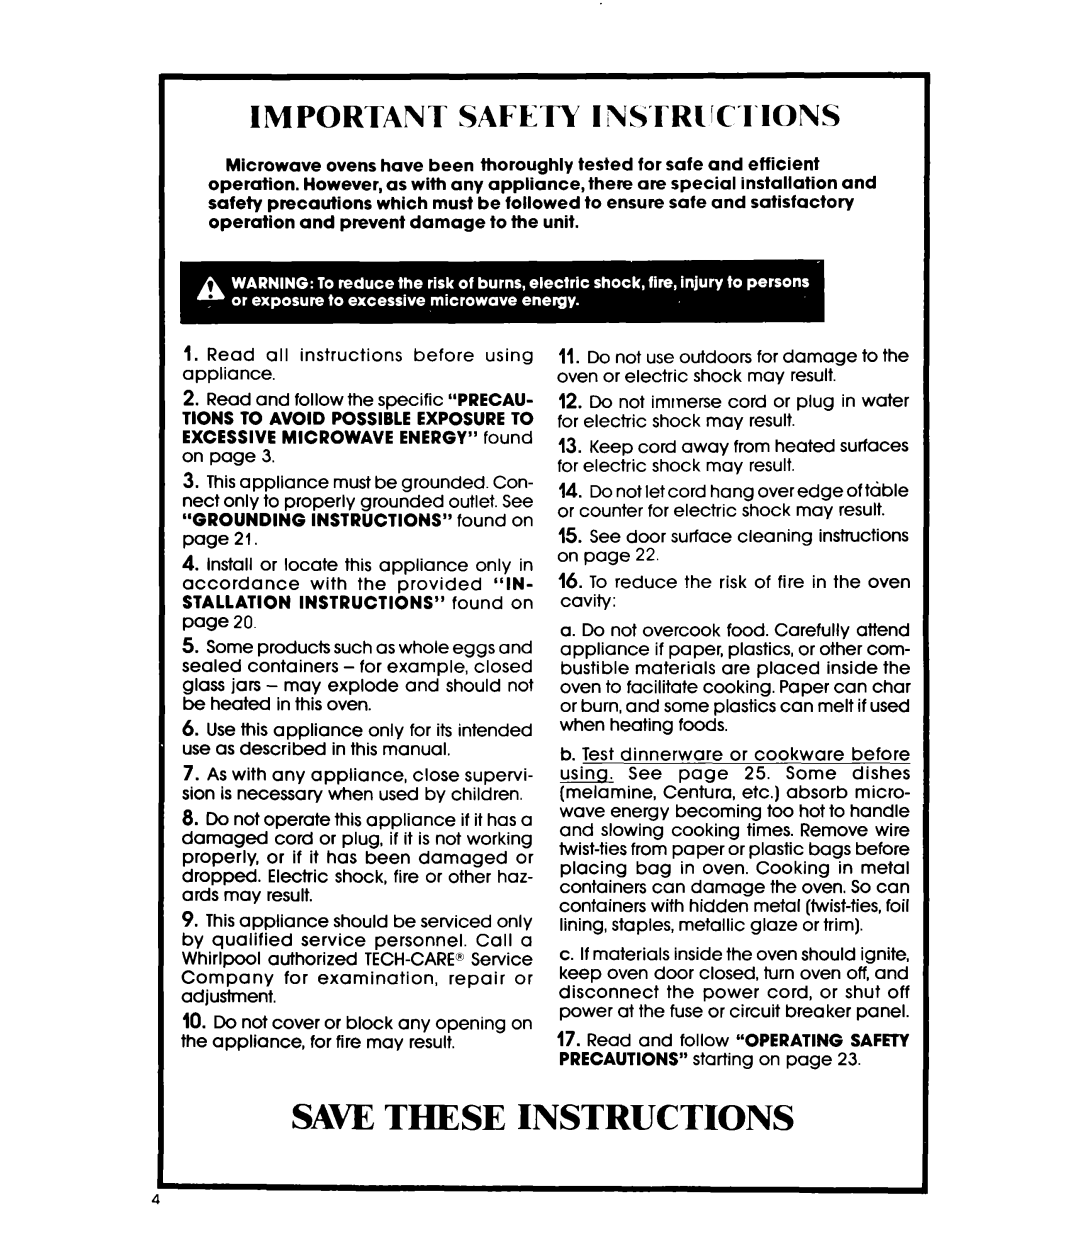 Whirlpool MWl500XS, MWl501XS manual Saw These Instructions, IMPORTANT SAFETY I NSTR~~CT10NS 